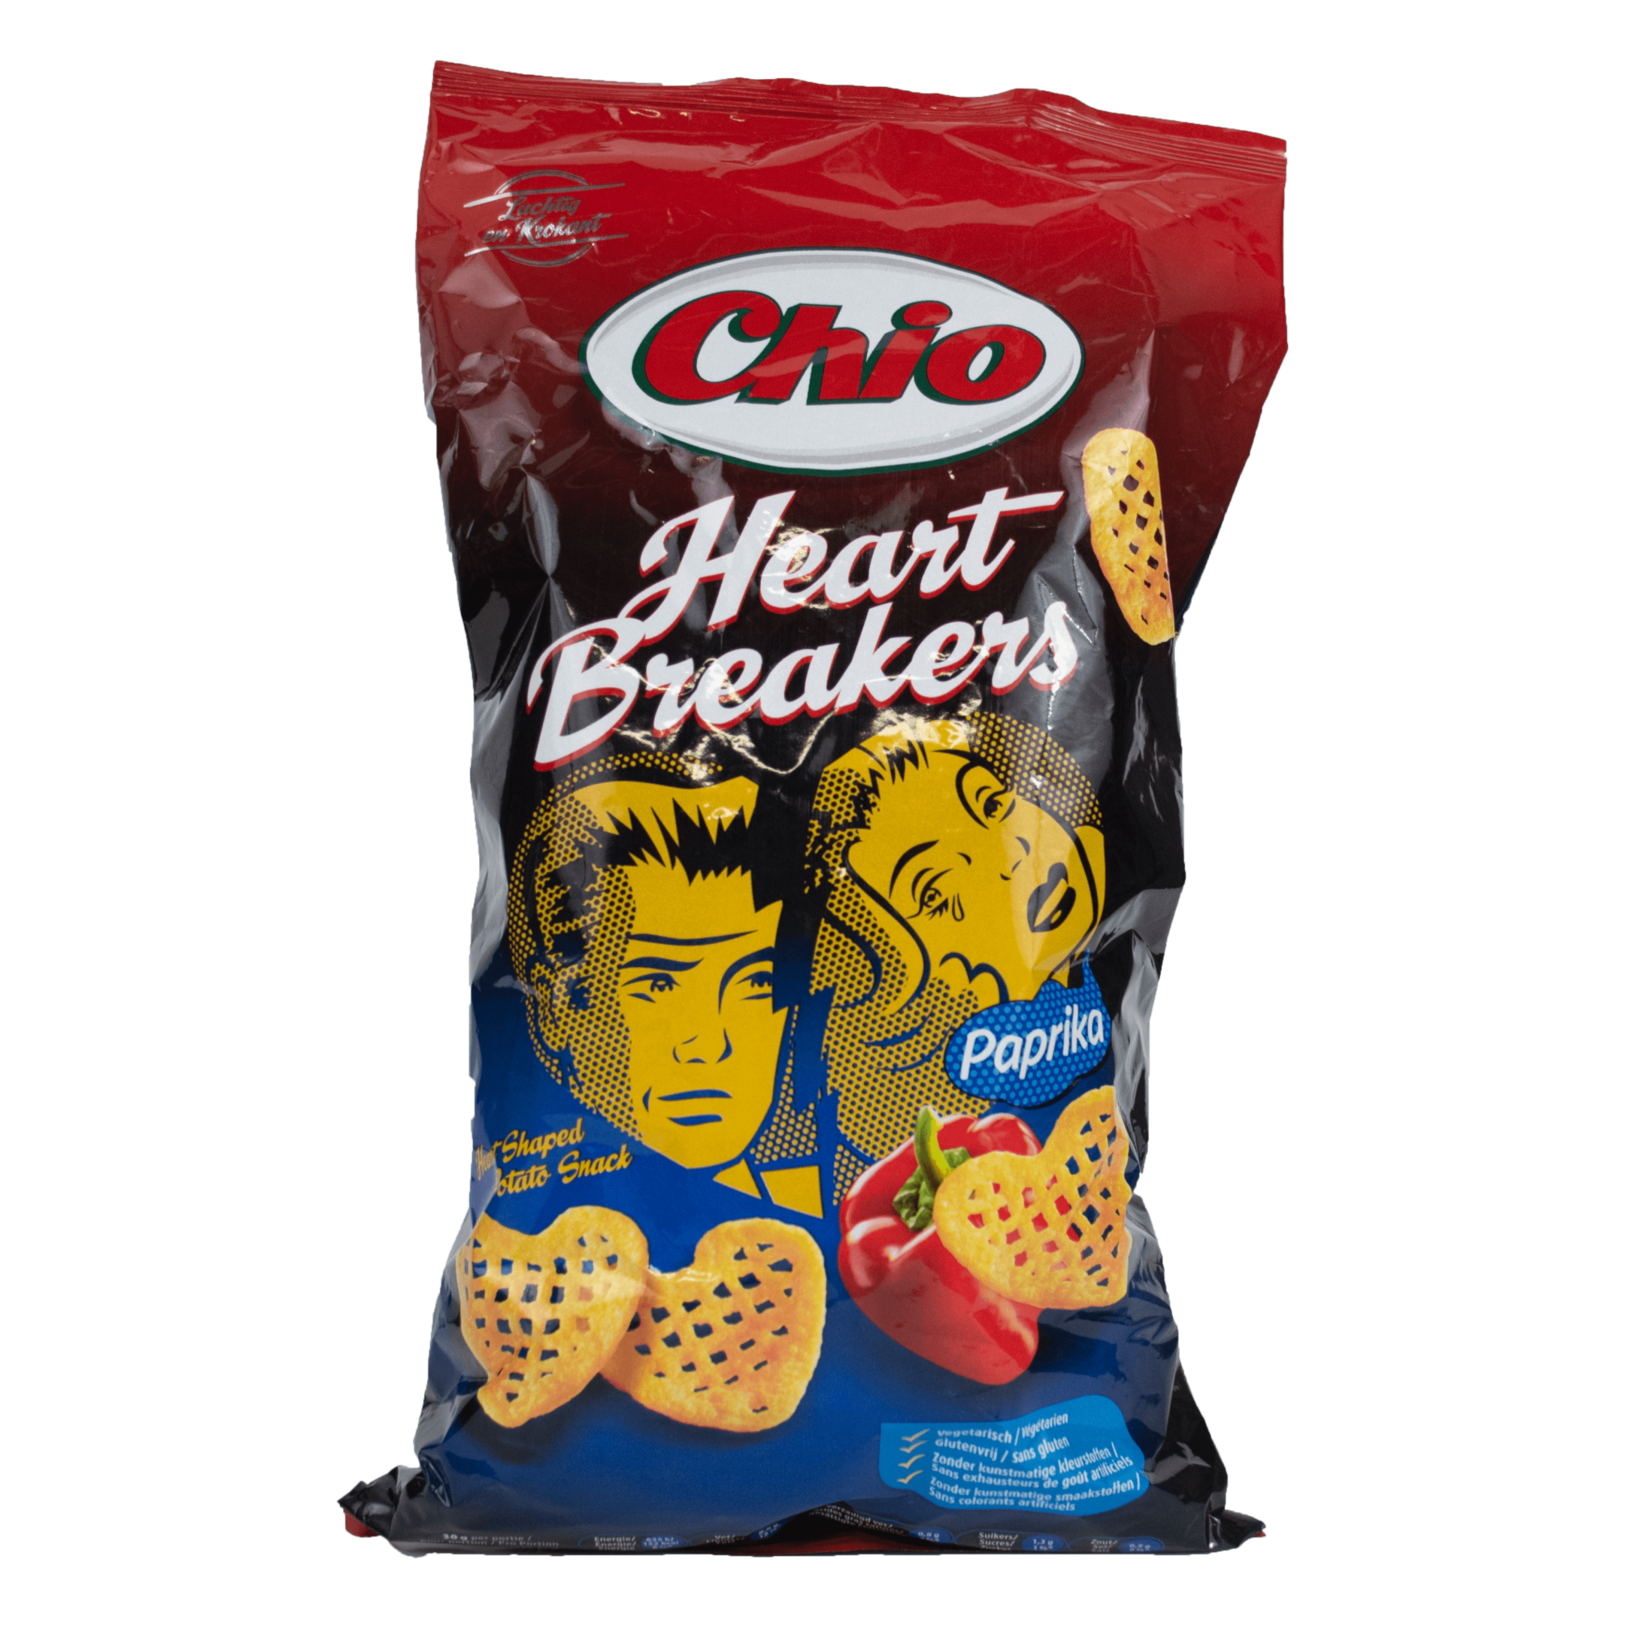 Chio Chio Heart Breakers - Paprika 125g